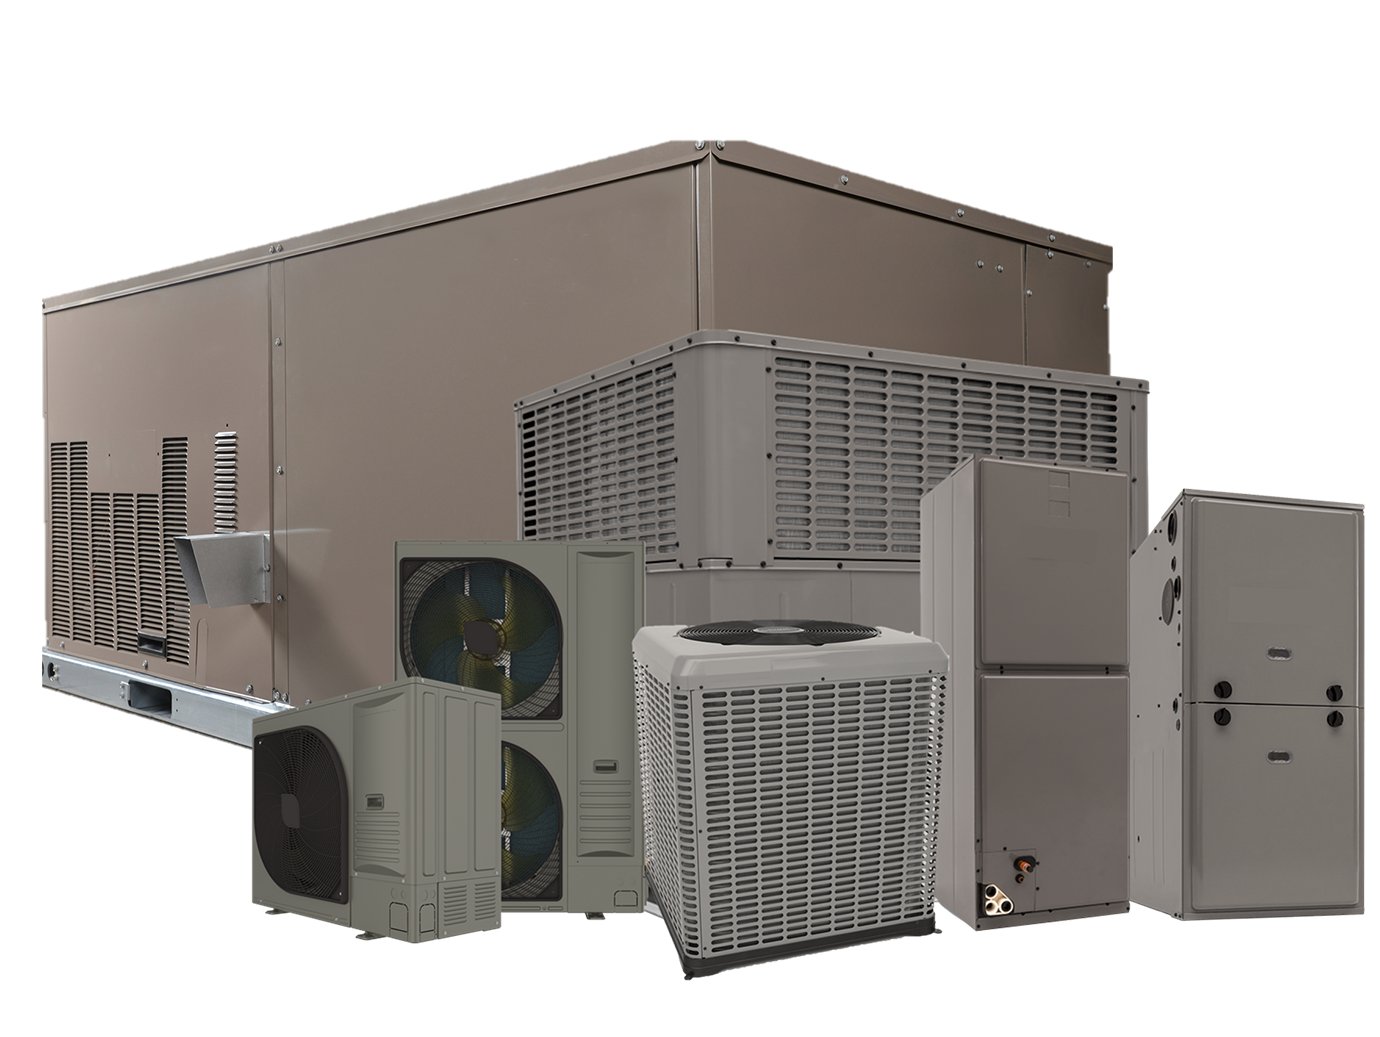 Heating, Cooling & Air Handling products